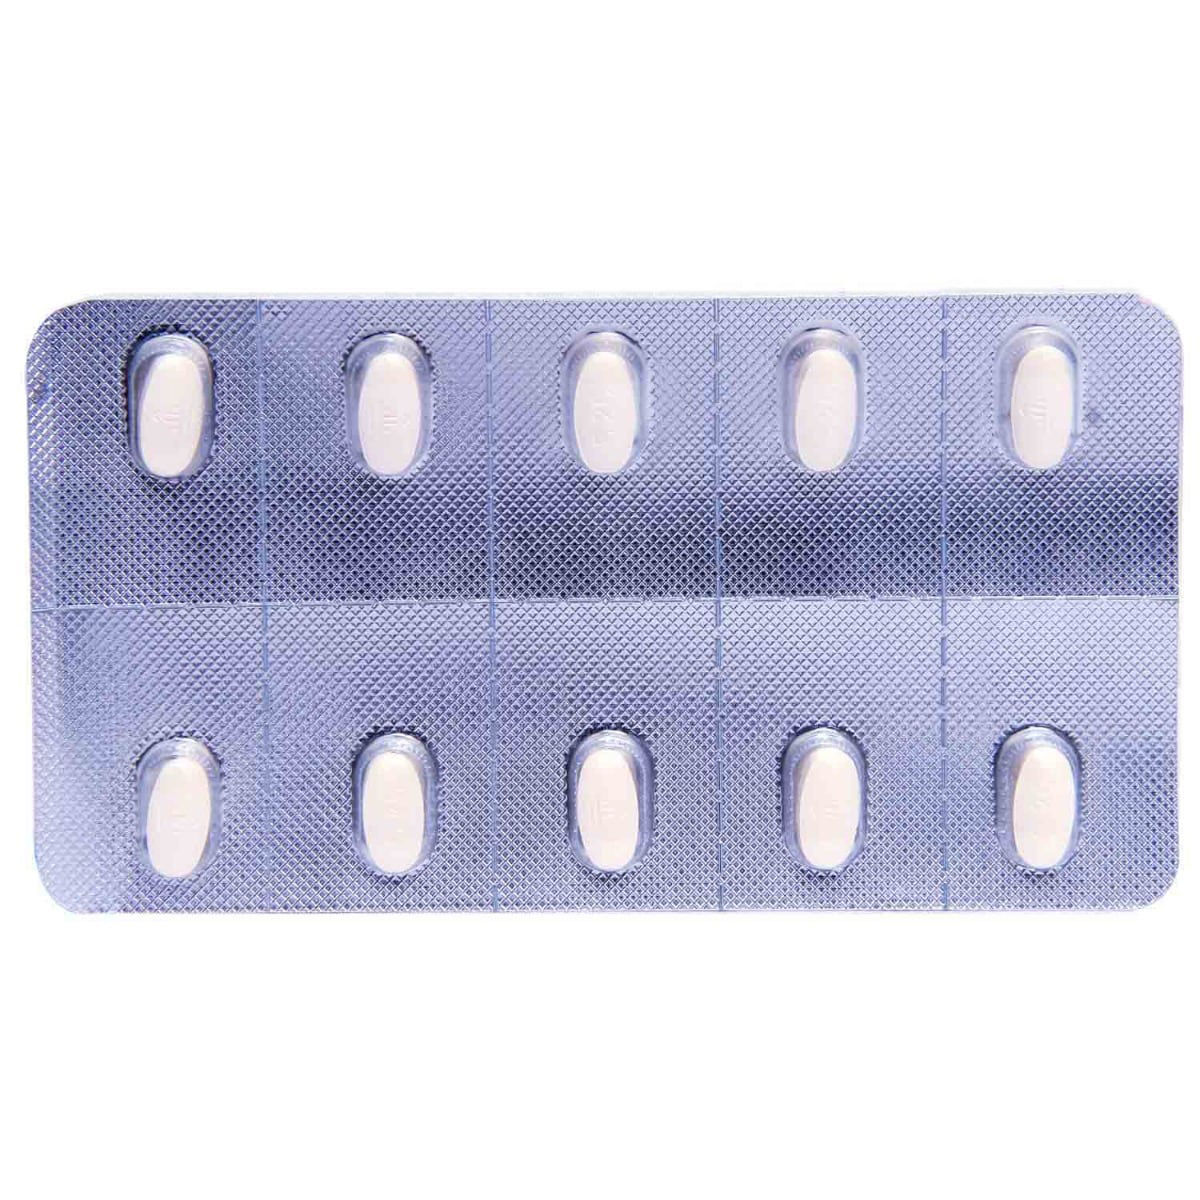 Jardiance 25 mg Tablet 10's Price, Uses, Side Effects, Composition